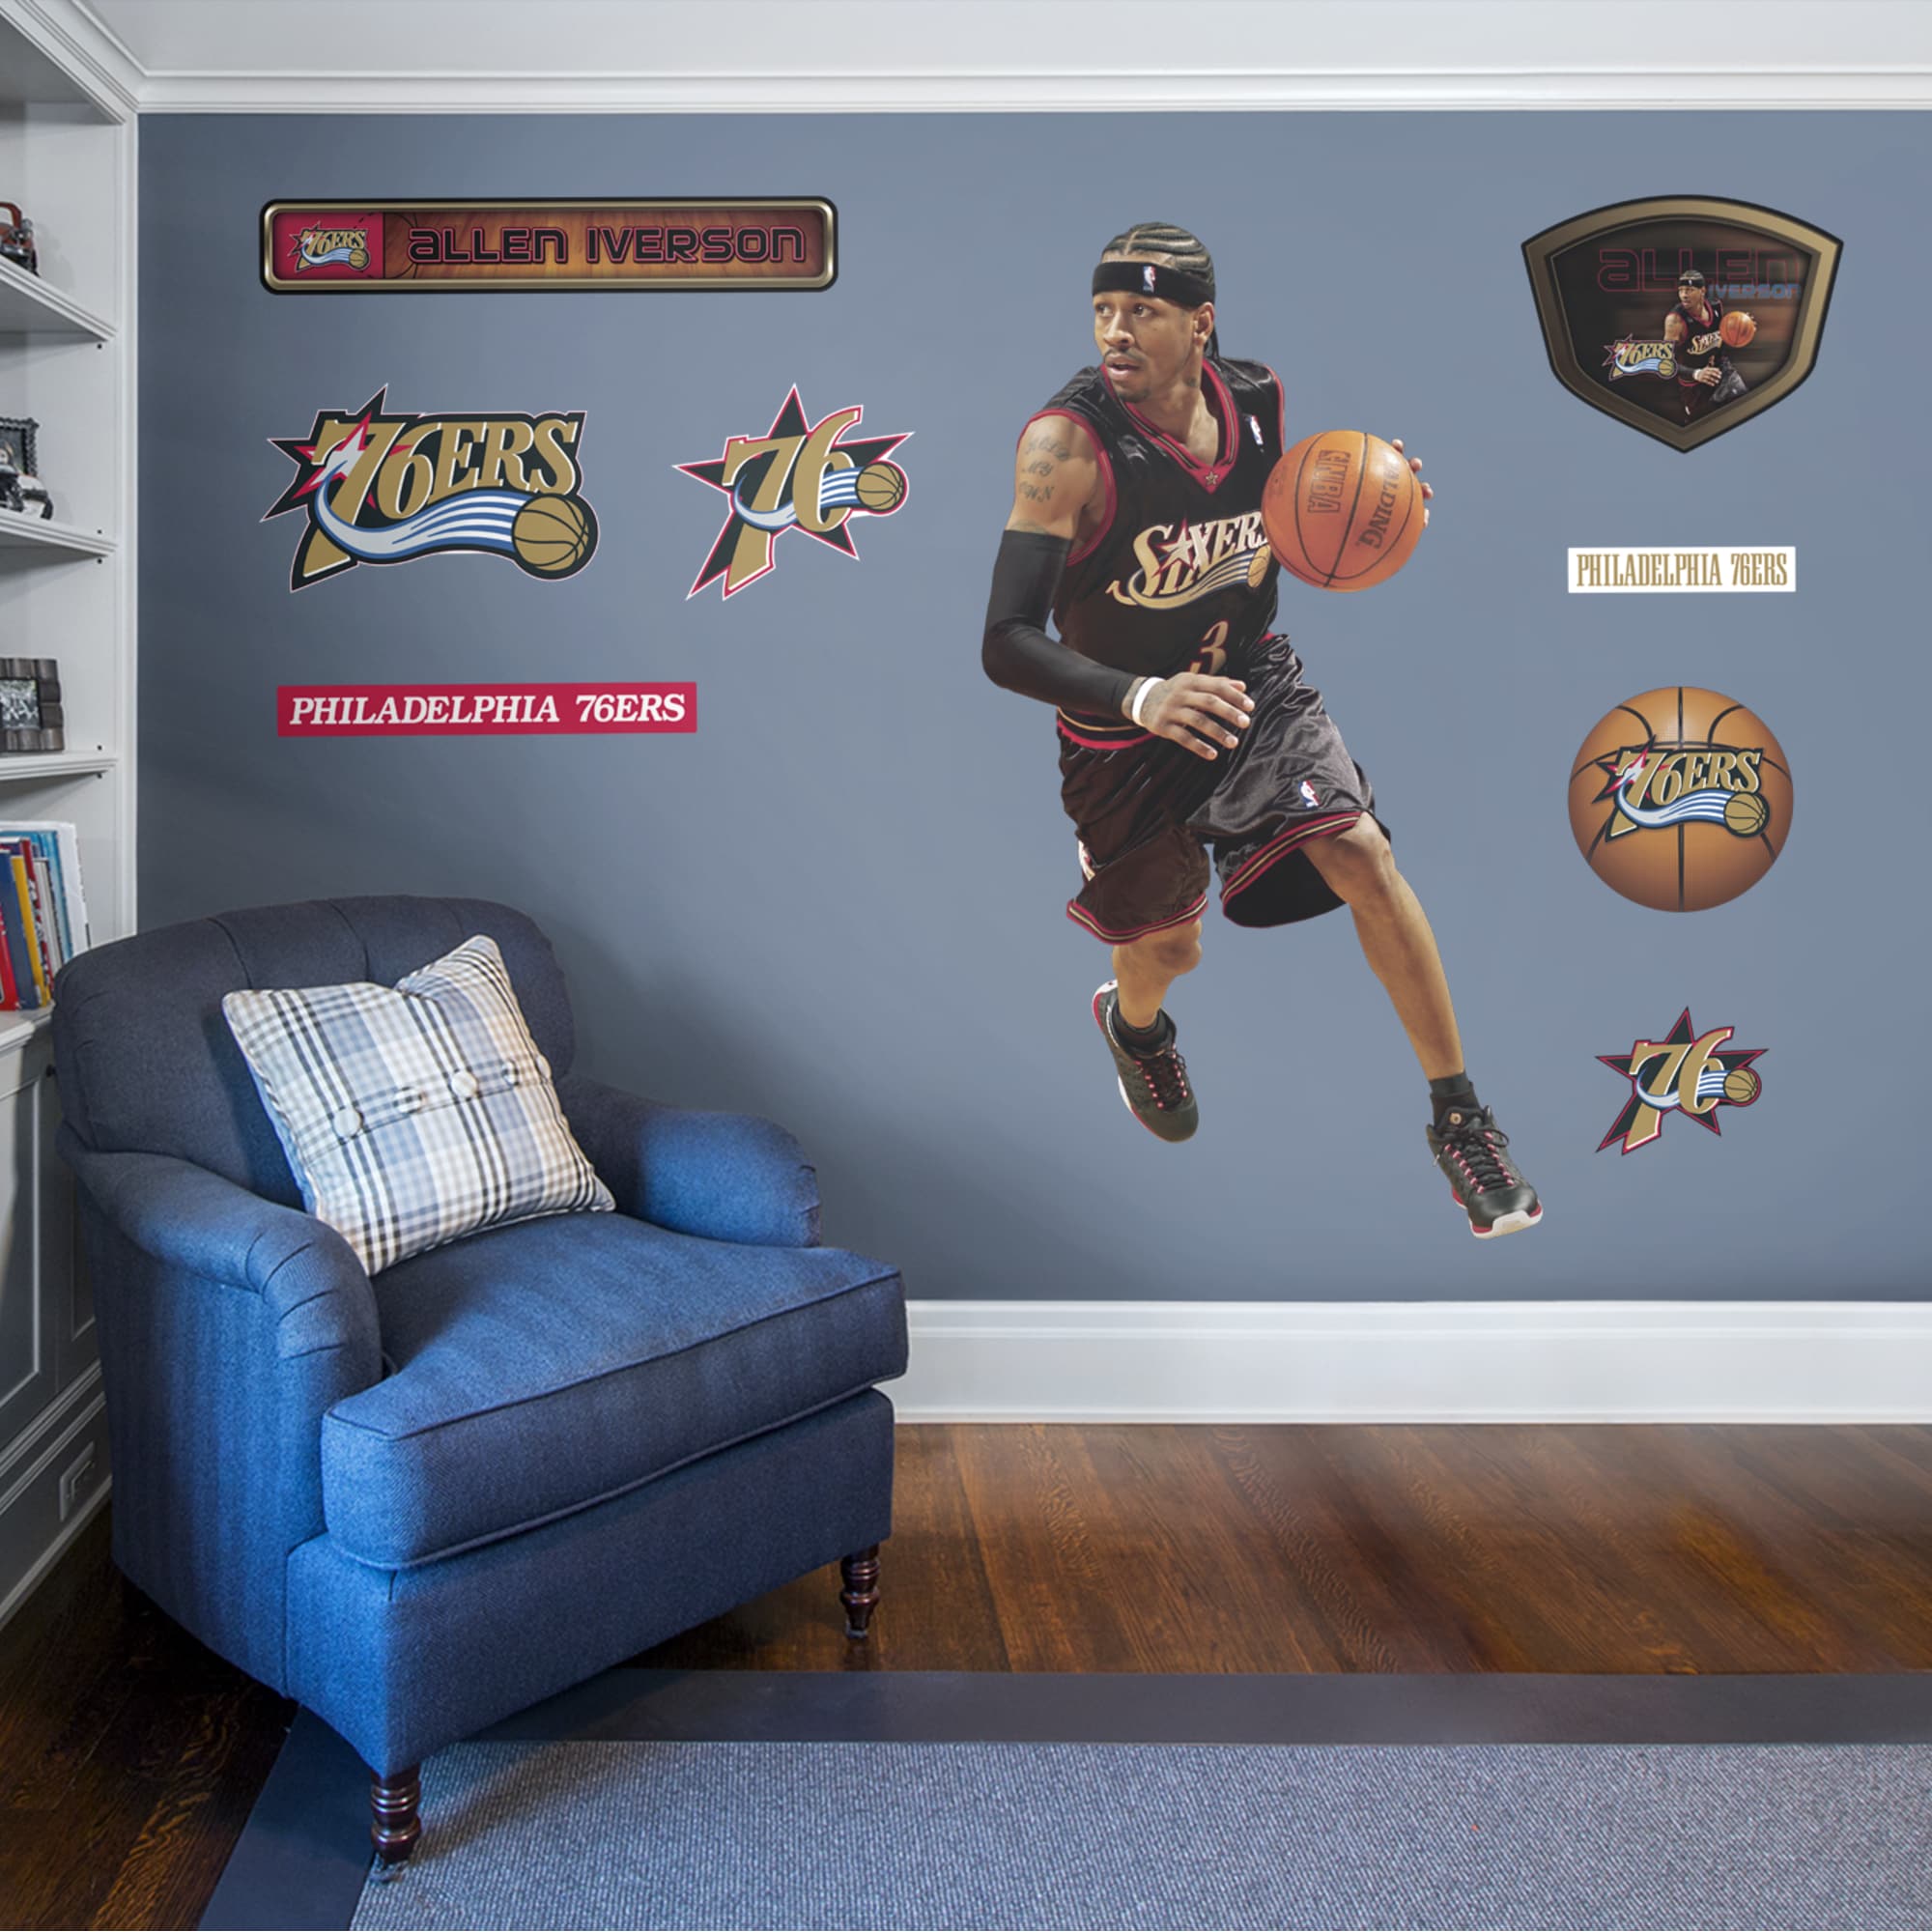 Allen Iverson: Legend - Officially Licensed NBA Removable Wall